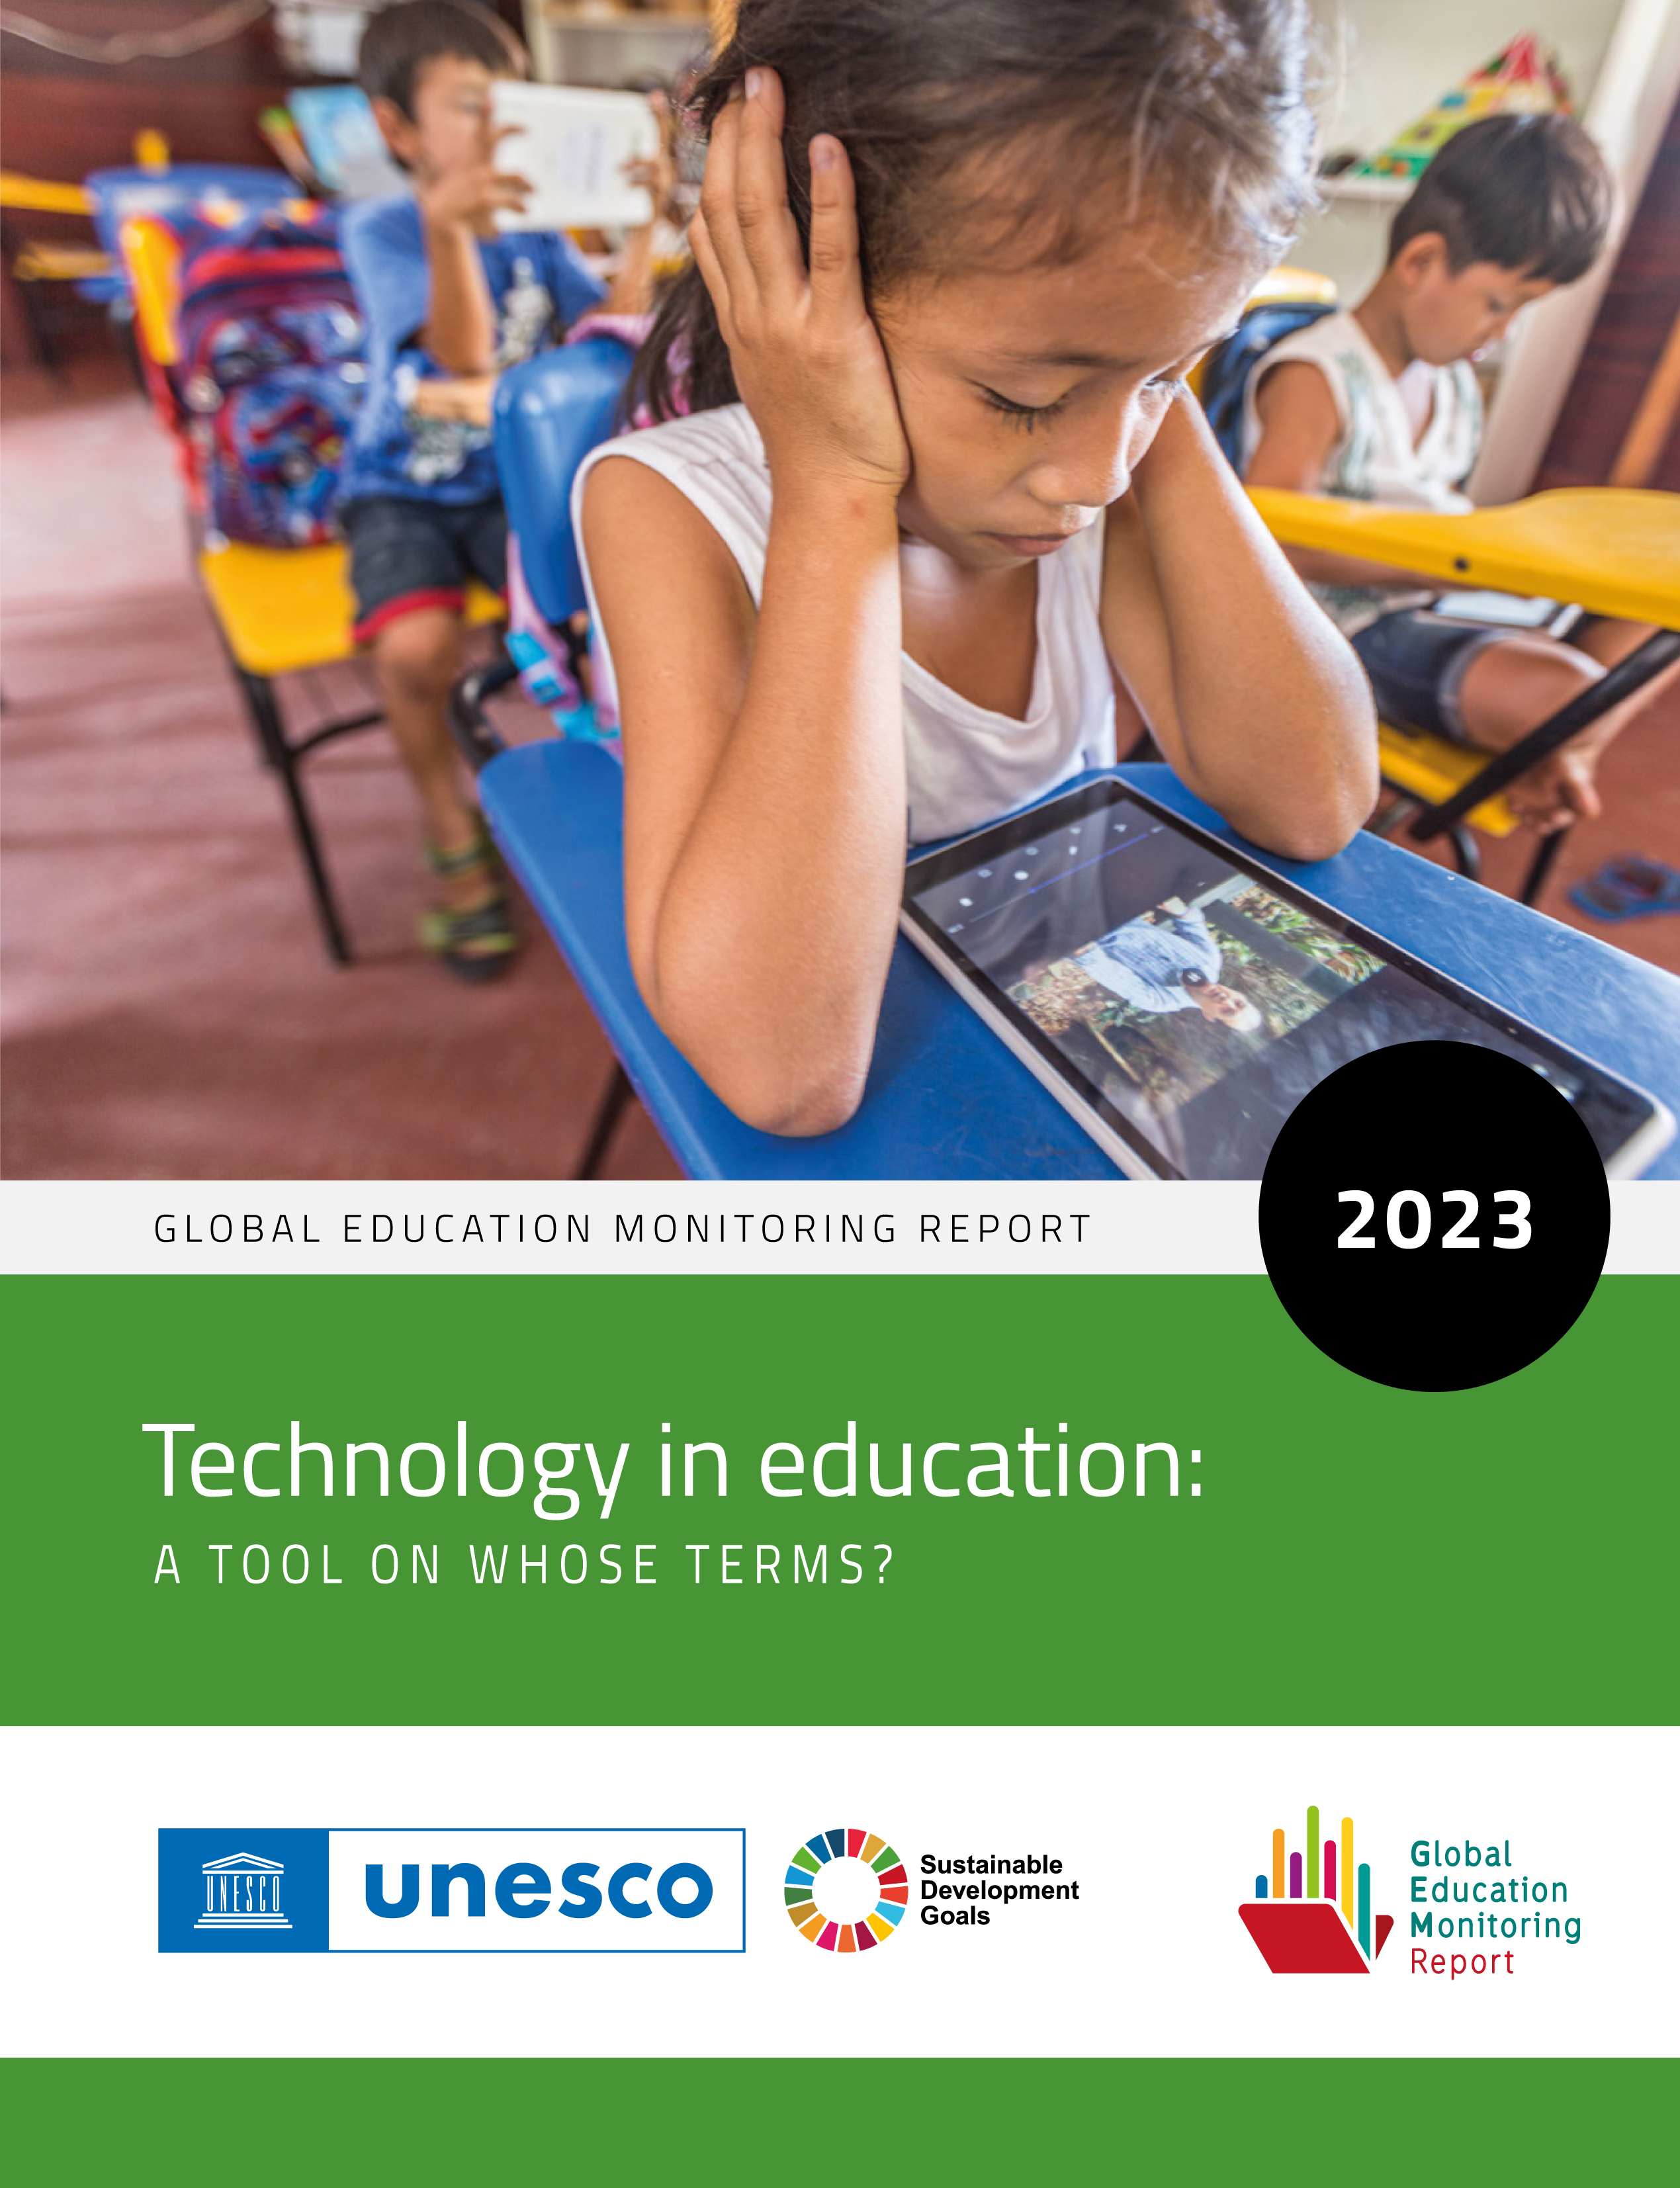 image of Global Education Monitoring Report 2023